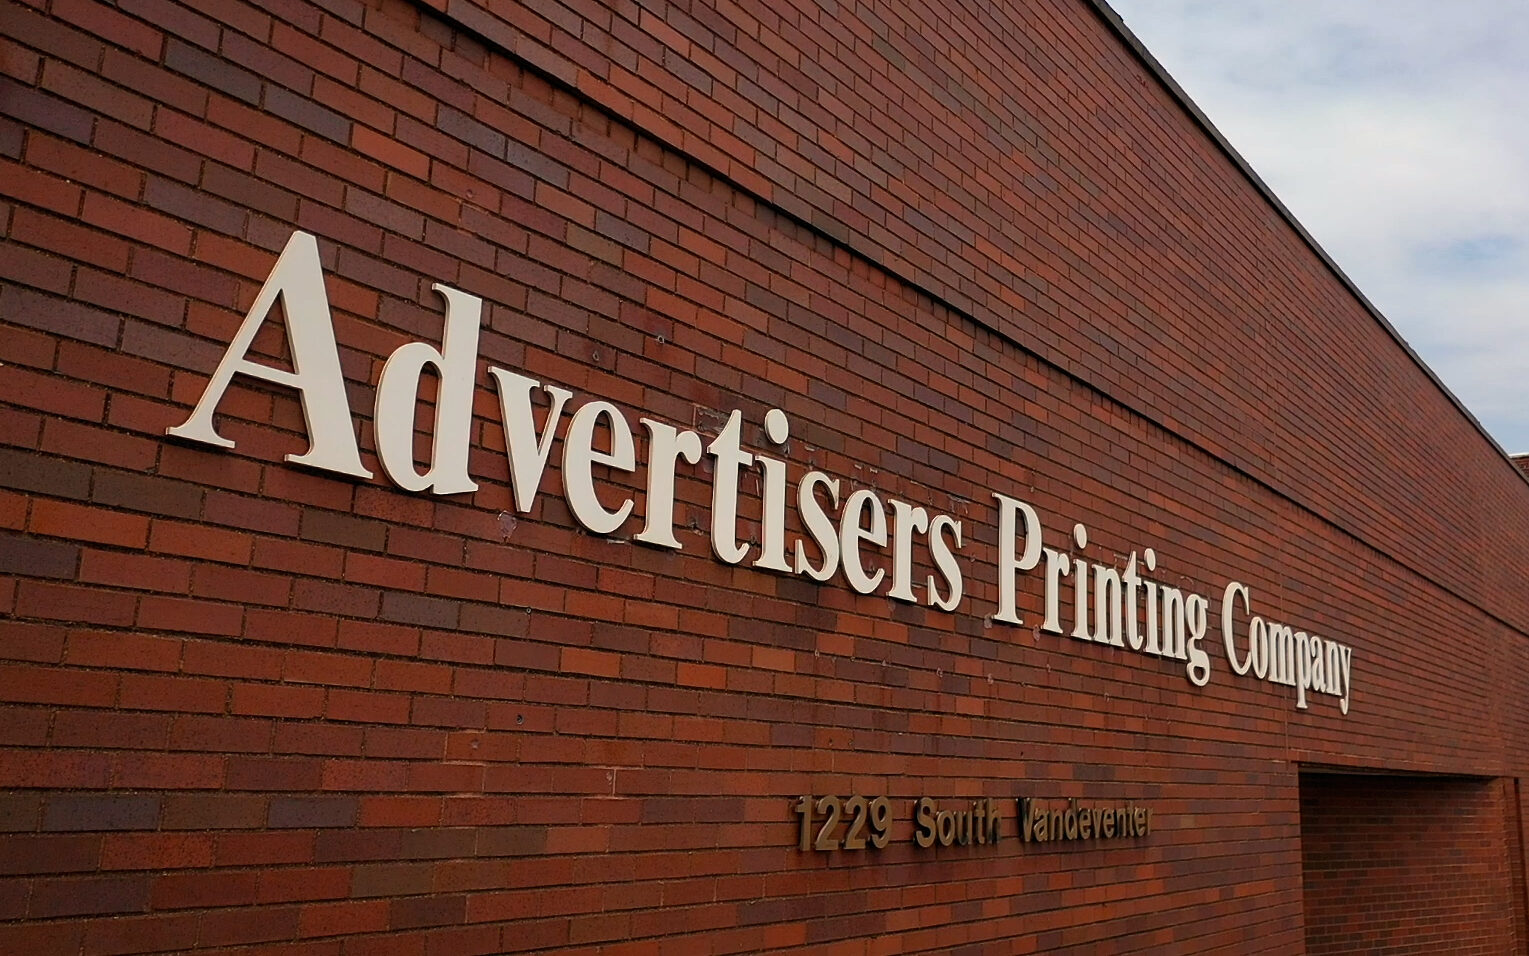 Exterior of Advertisers Printing Company.